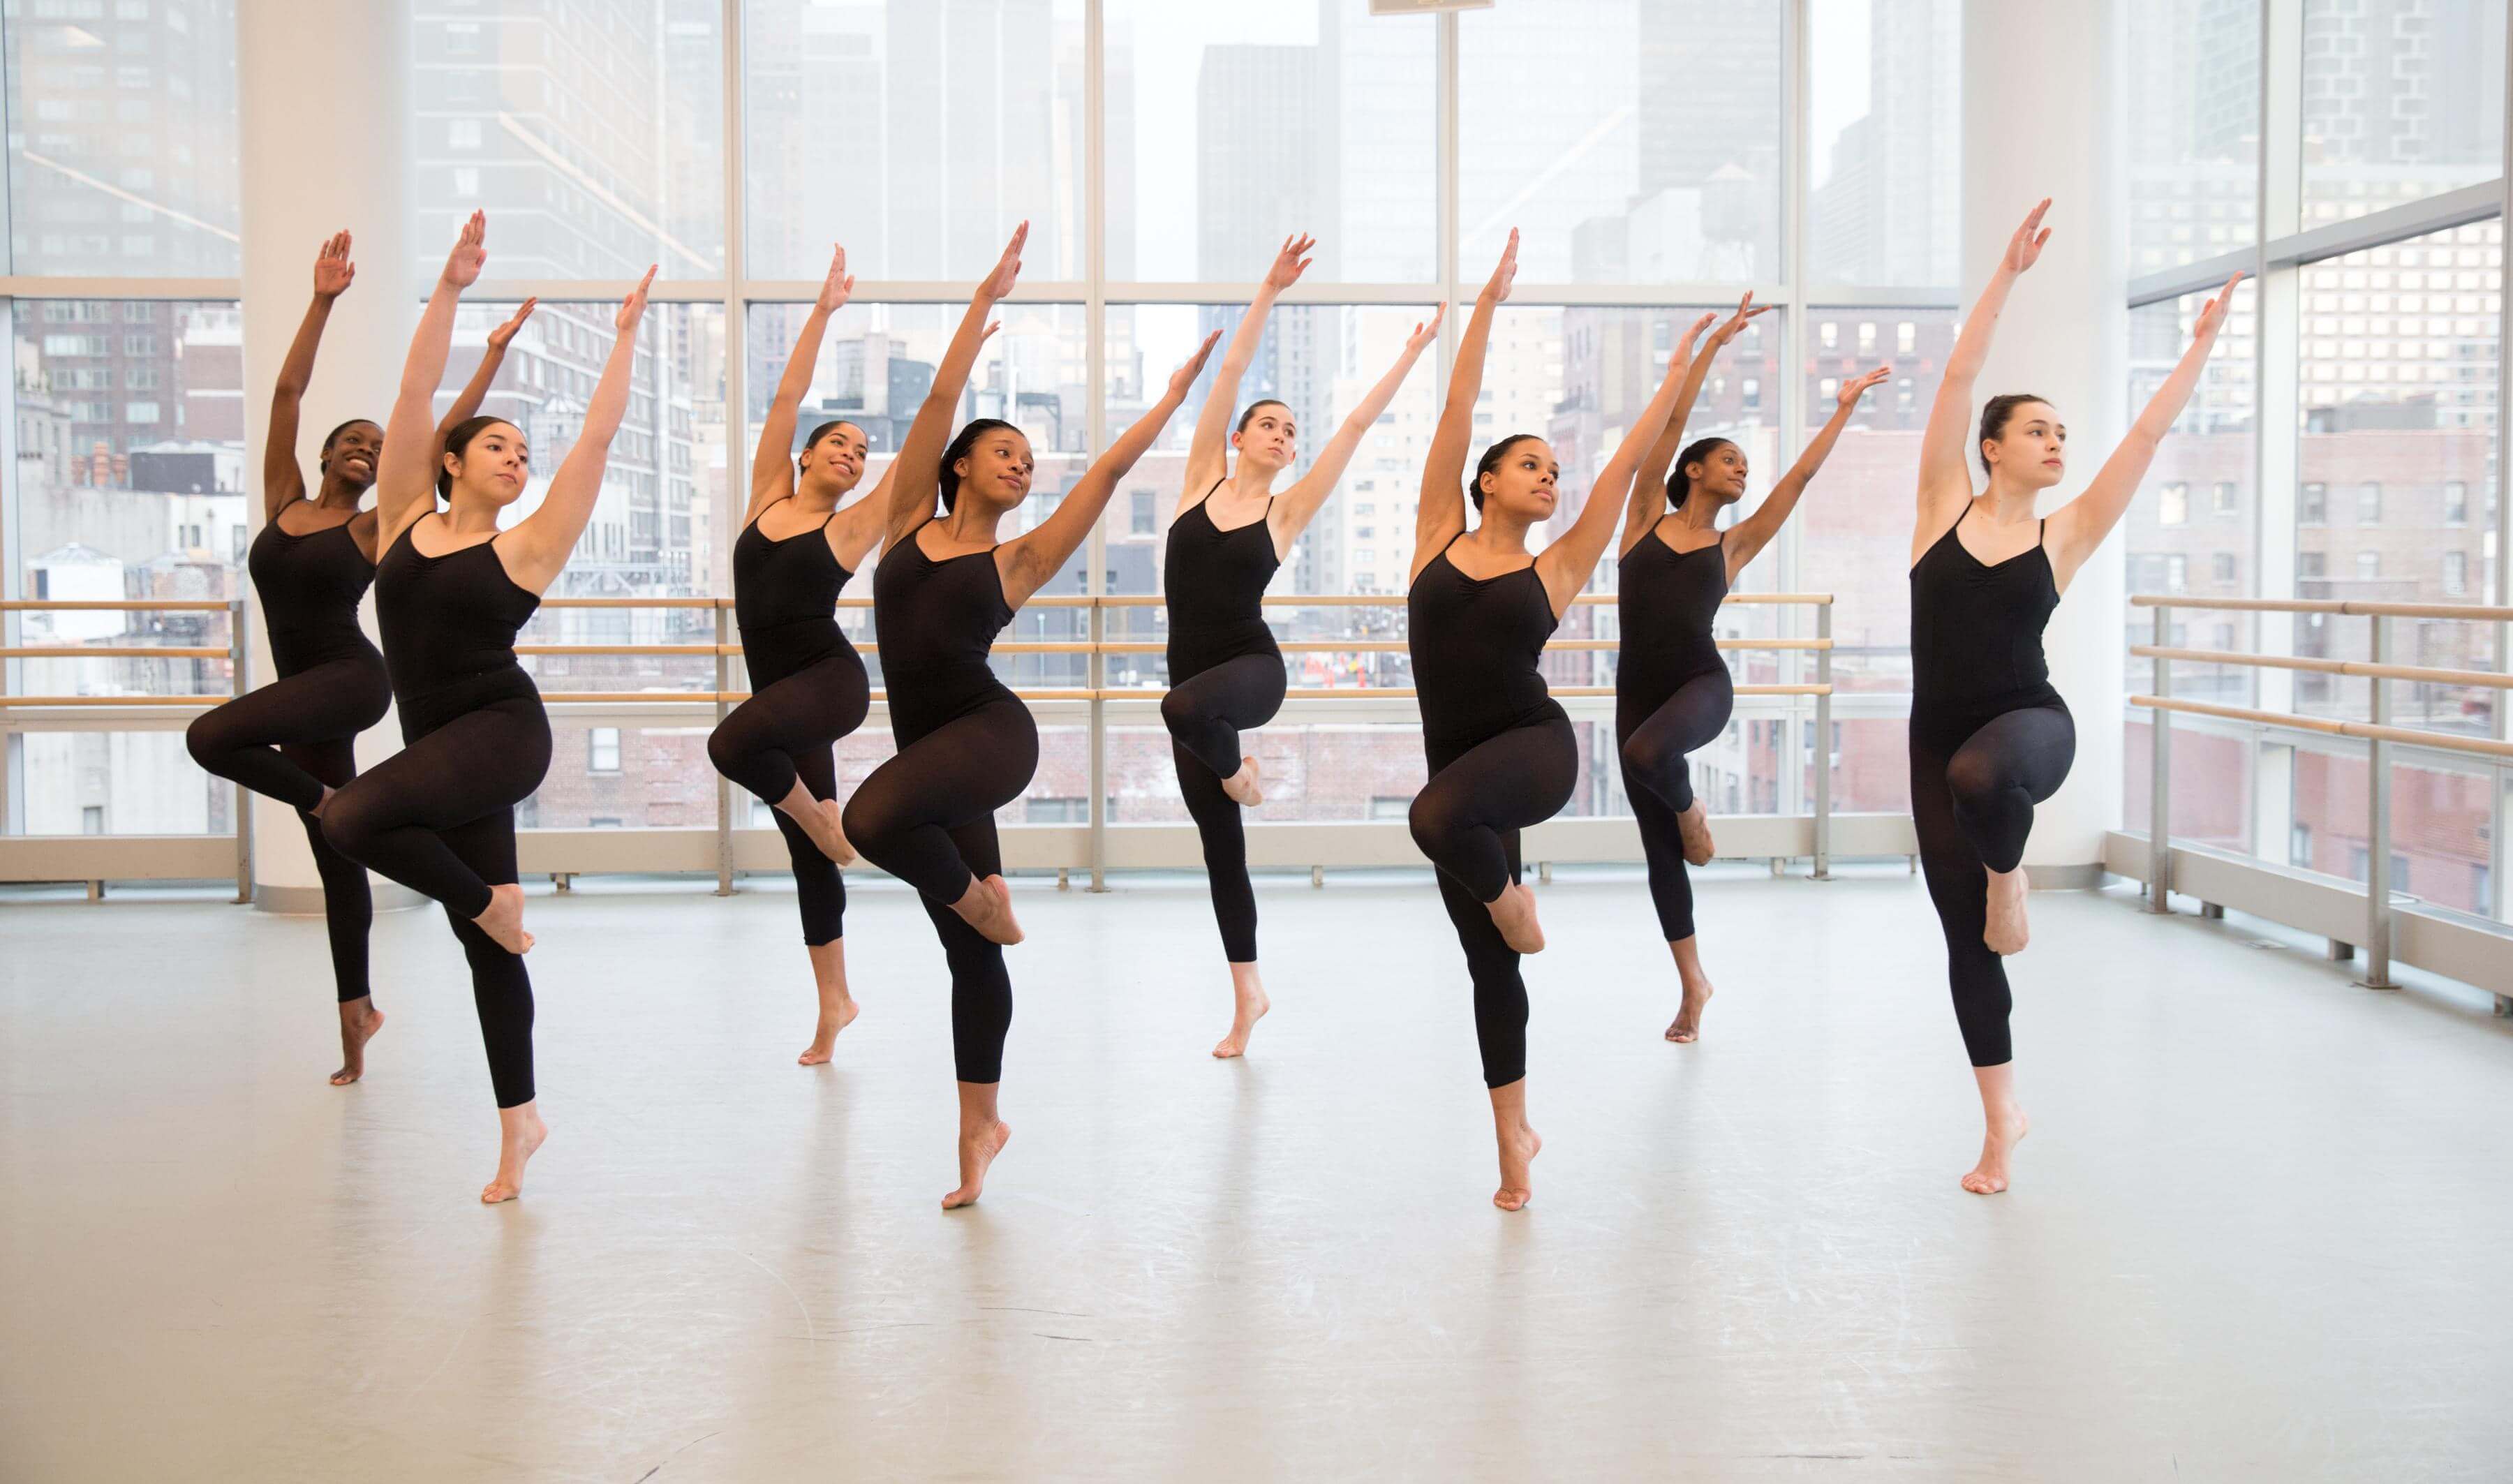 Students of The Ailey School Junior Division